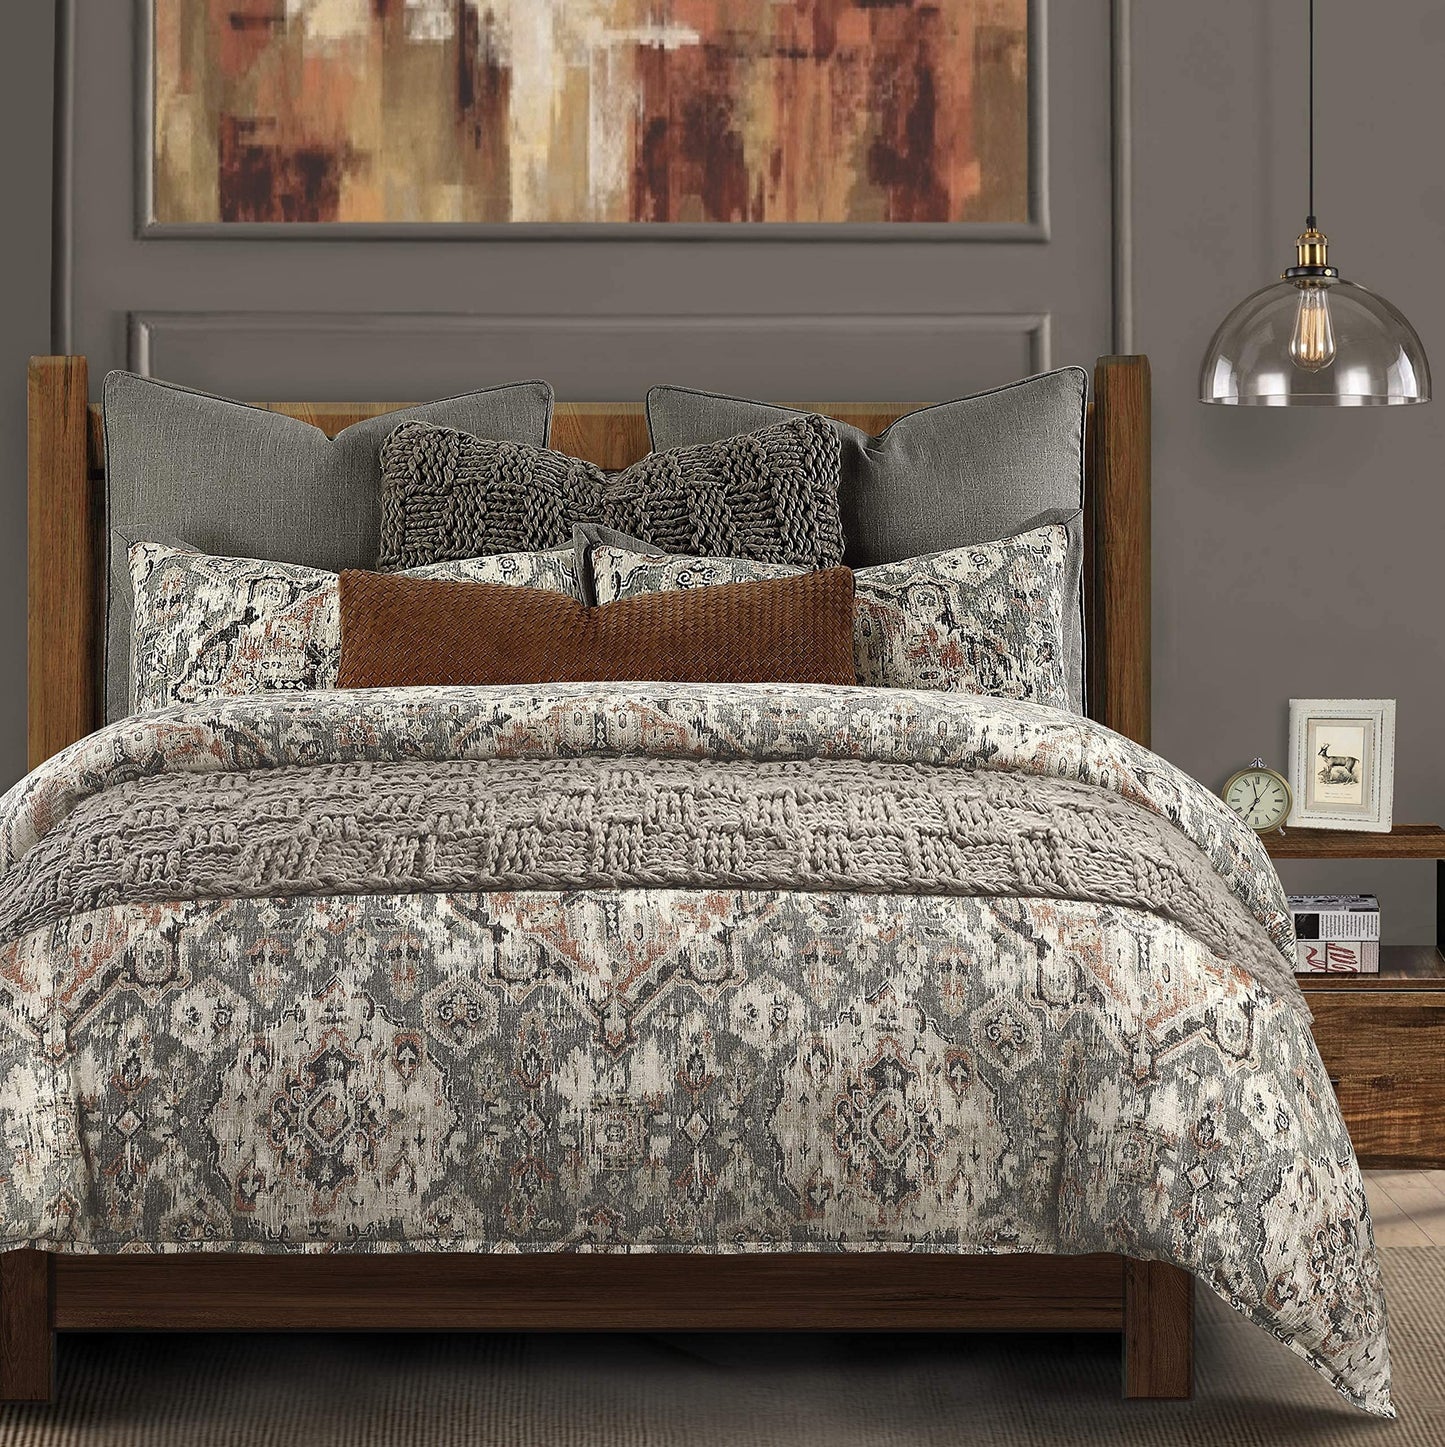 HiEnd Accents Carmen Kilim 3 Piece Comforter Set with Pillow Shams, Gray Medallion, Super King Size, Modern, Traditional, Rustic Style Luxury Bedding Set, 1 Comforter and 2 Pillowcases